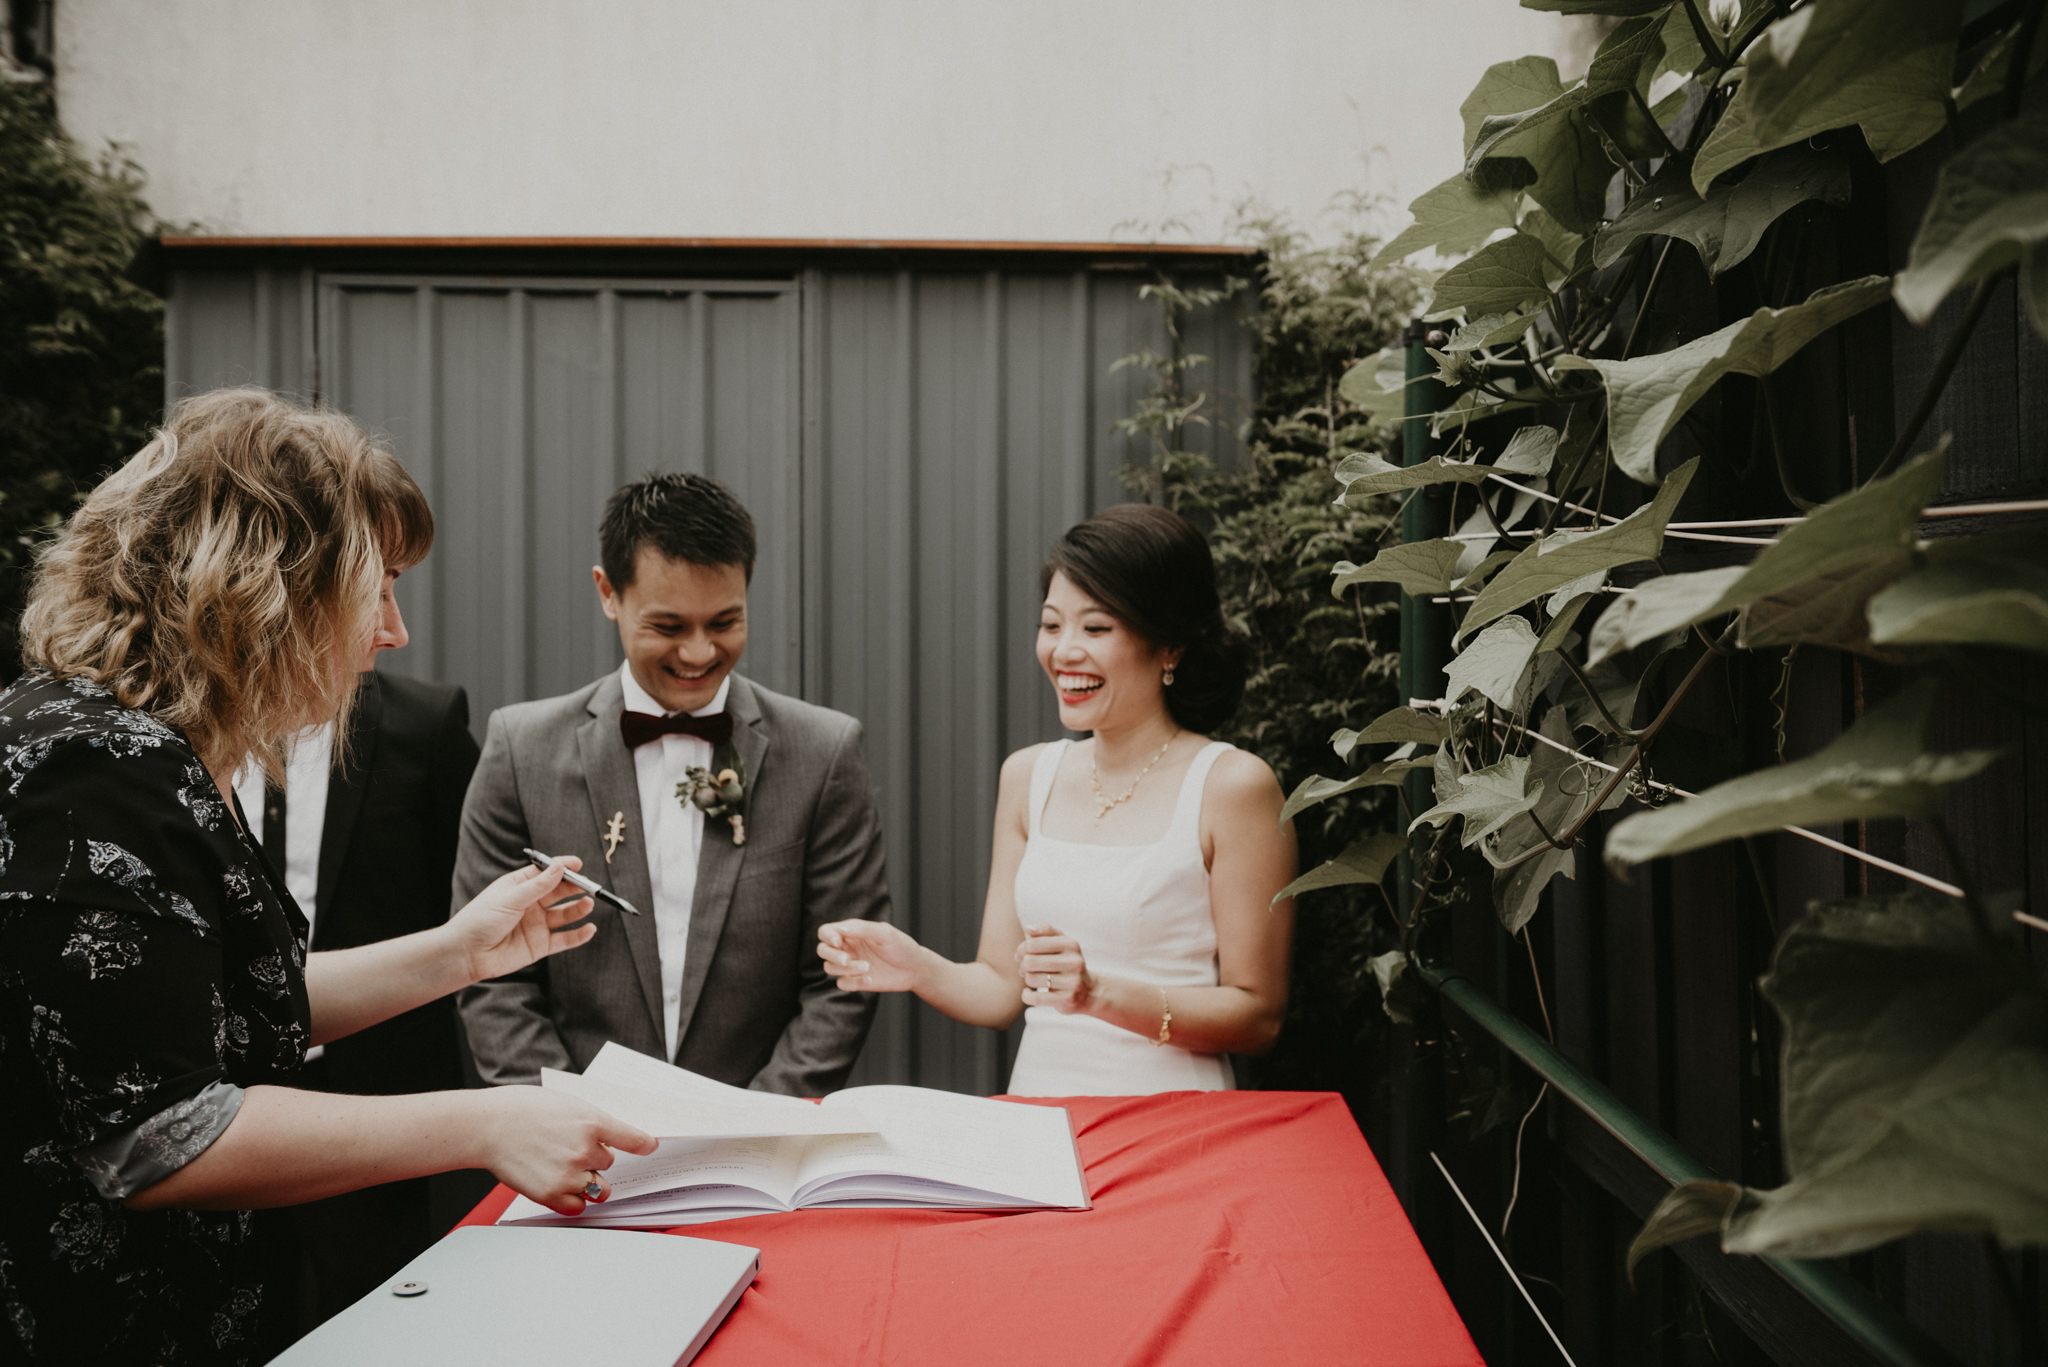 agnes-duy-15th-december-2018-chinese-vietnamese-wedding-tea-ceremony-yarraville-home-house-documentary-candid-photographer-sarah-matler-photography-73